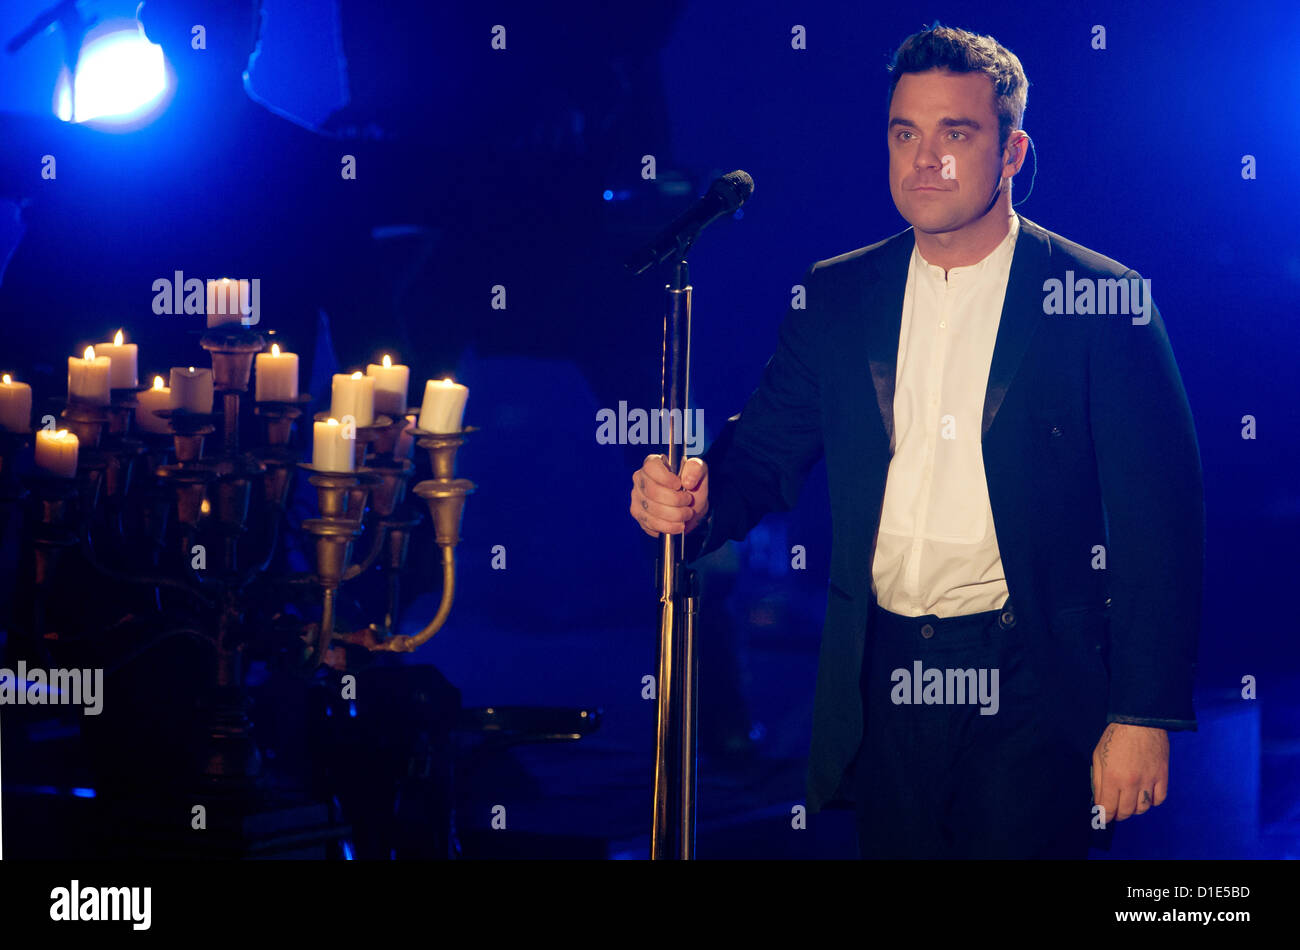 Singer Robbie Williams stands on the stage as a guest star during the casting show 'The Voice of Germany' in Berlin, 14 December 2012. 4 out of 66 candidates made it to the finale of the show. Photo: Tim Brakemeier Stock Photo